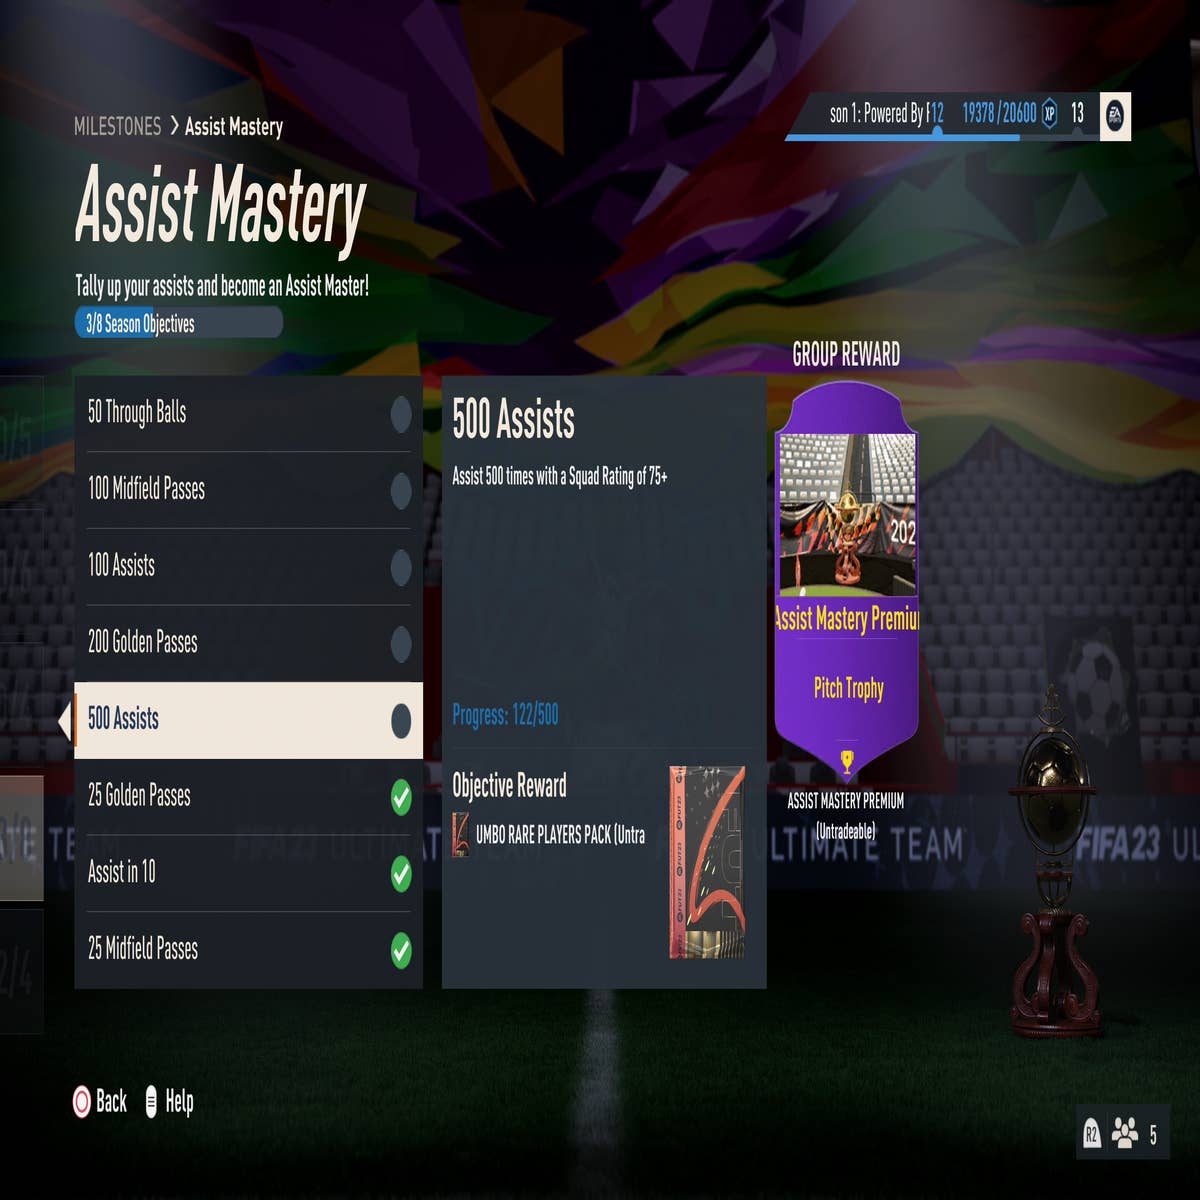 How to Sell Consumables in FIFA 23 - Operation Sports